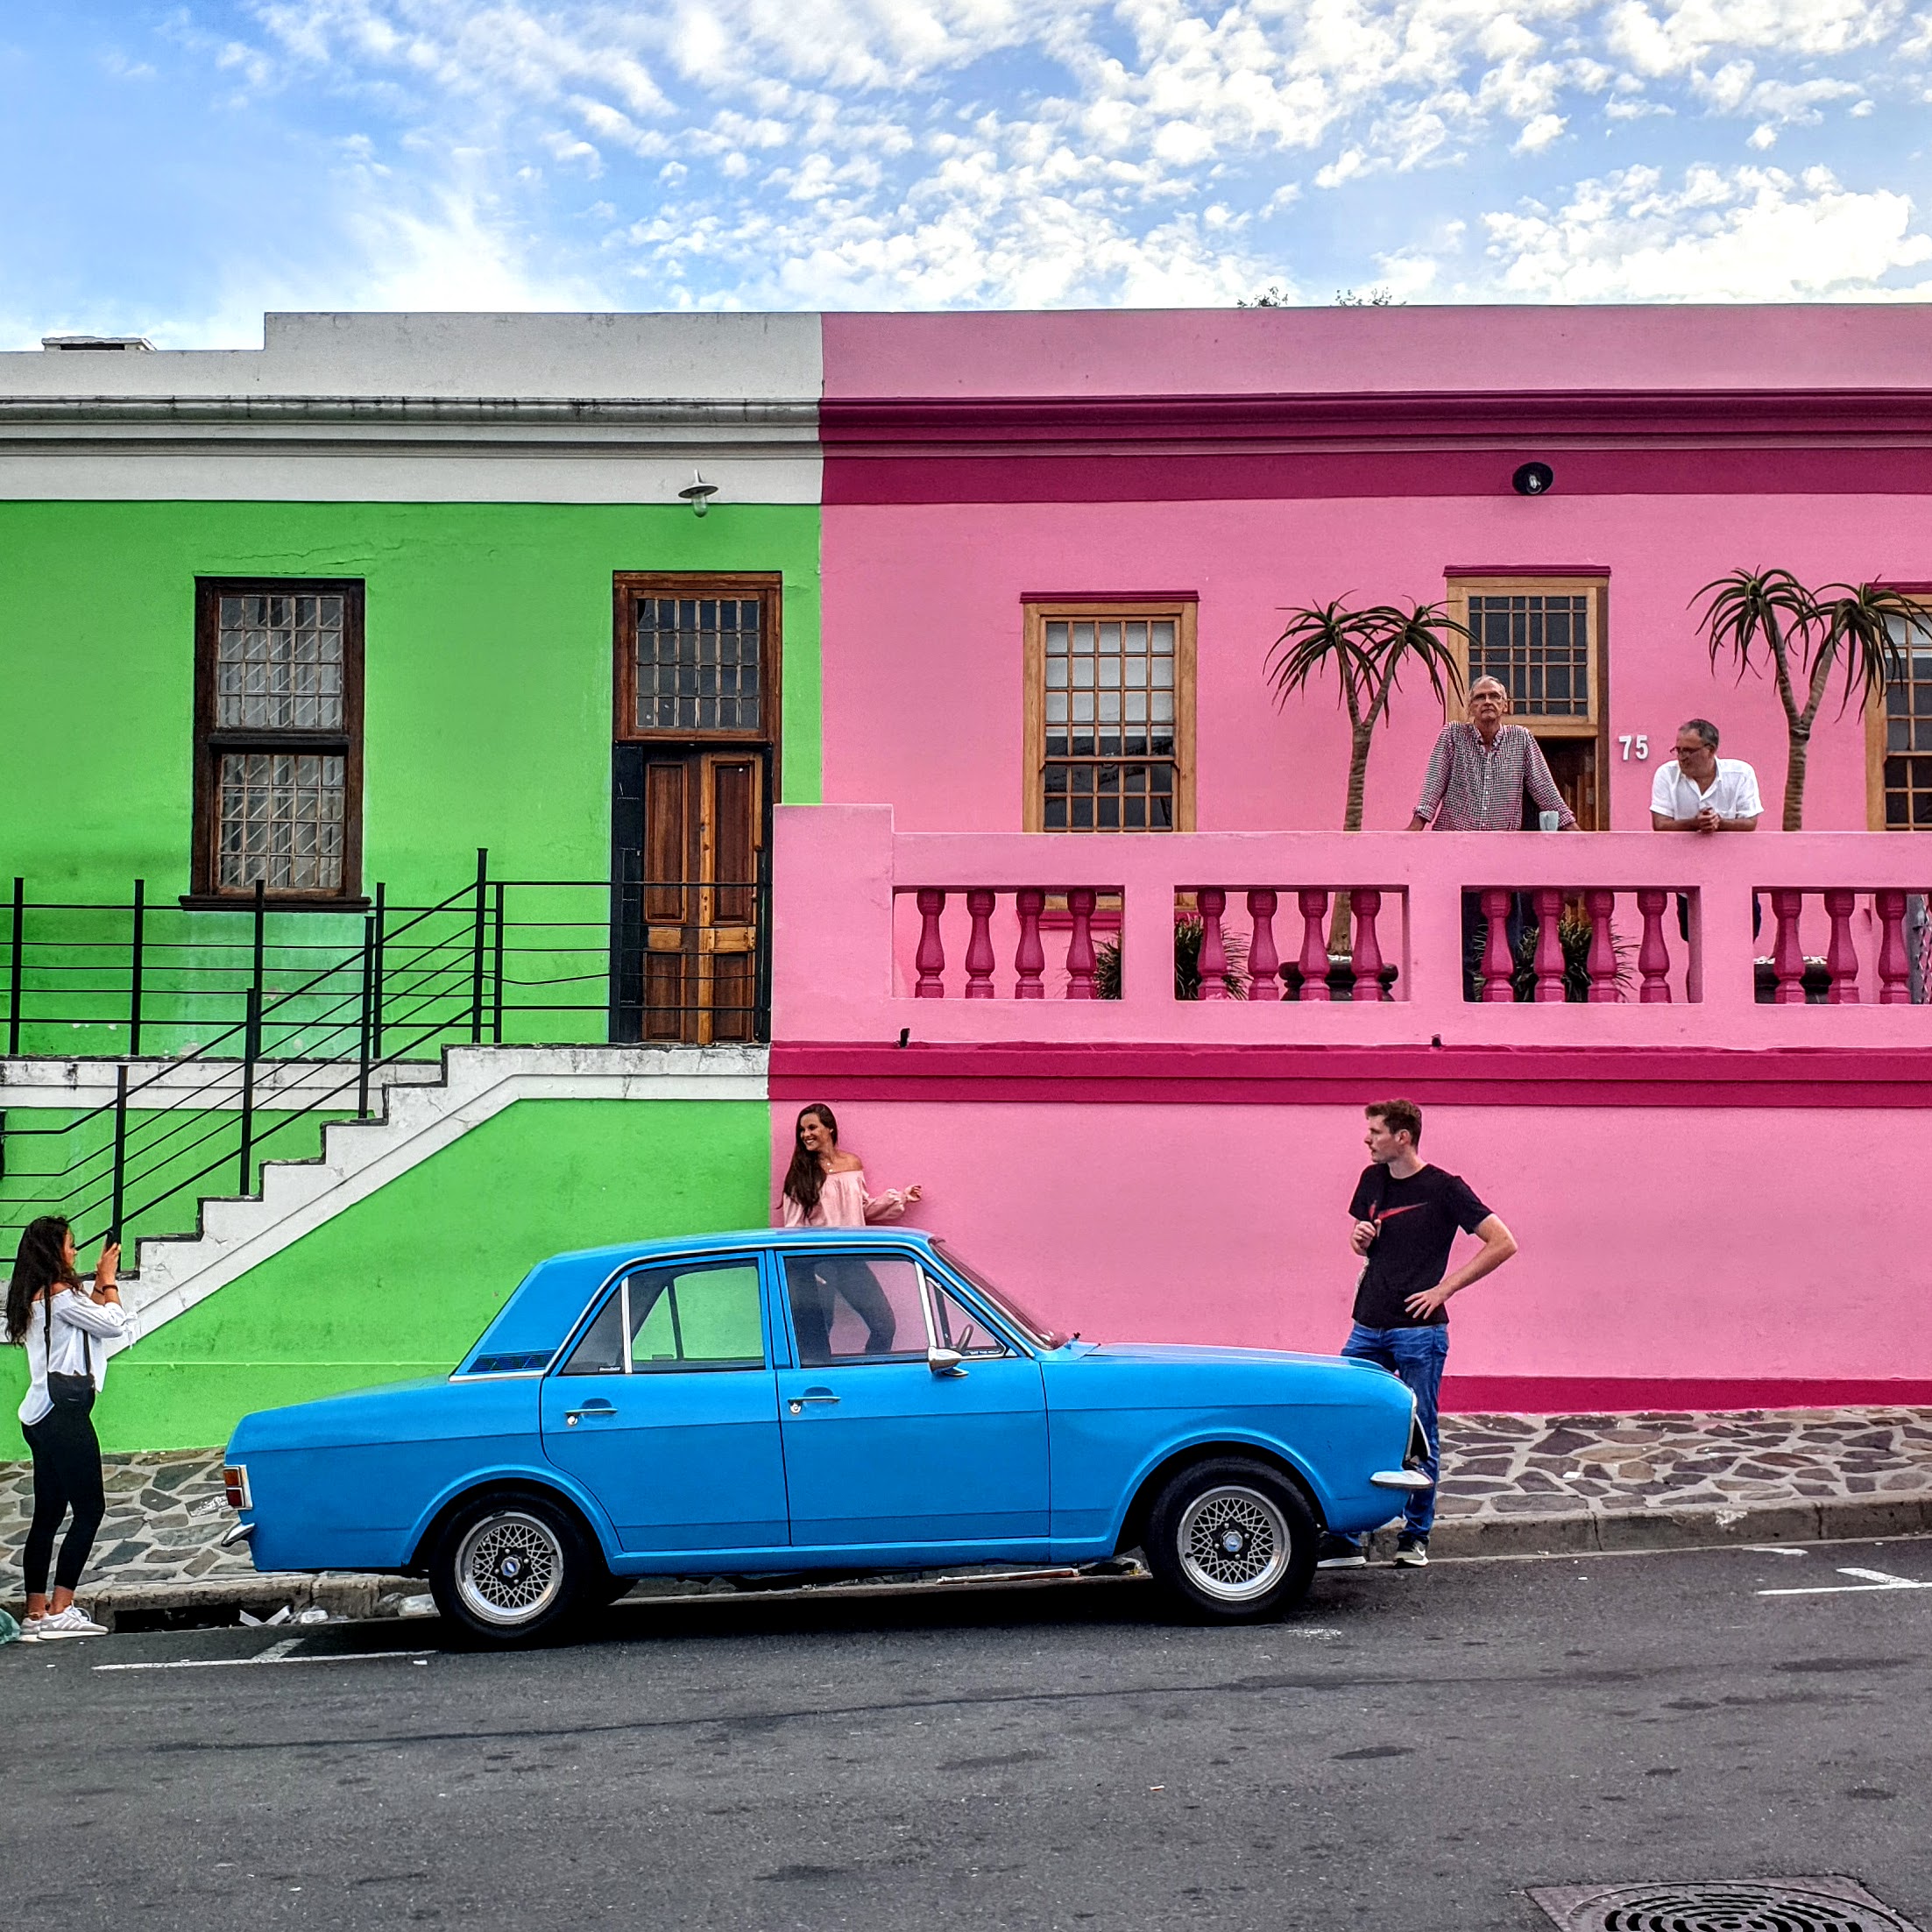 Bo-Kaap in Cape Town, South Africa